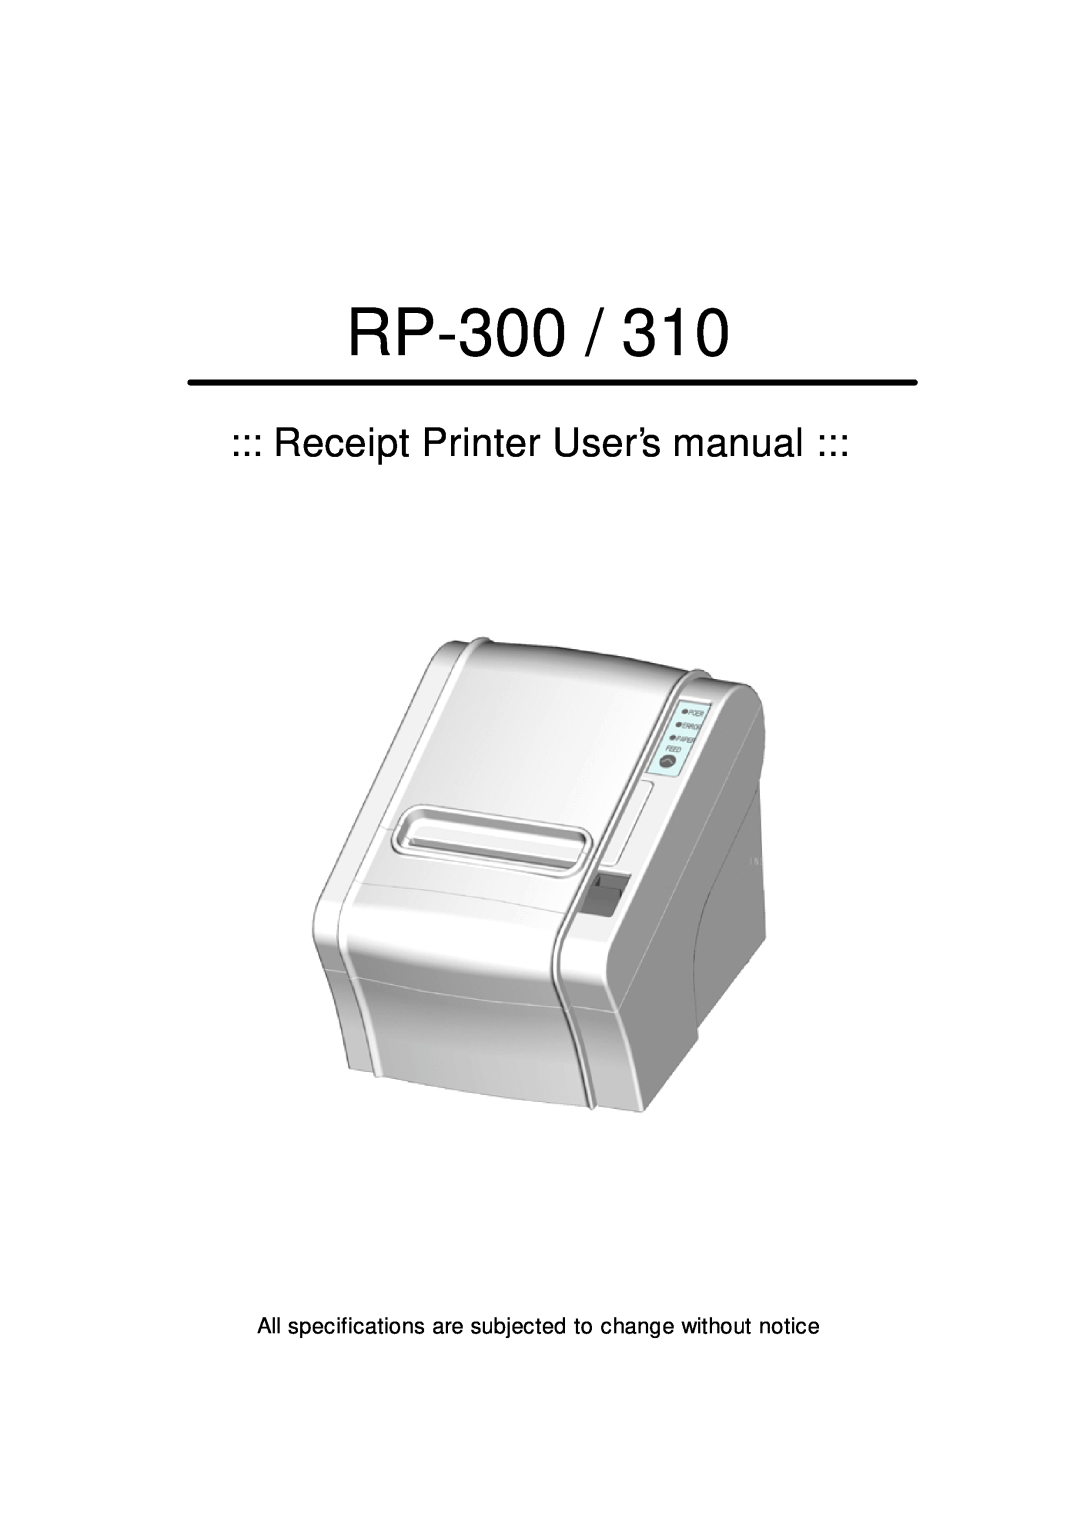 Epson RP-310 user manual All specifications are subjected to change without notice, RP-300, Receipt Printer User’ manual 